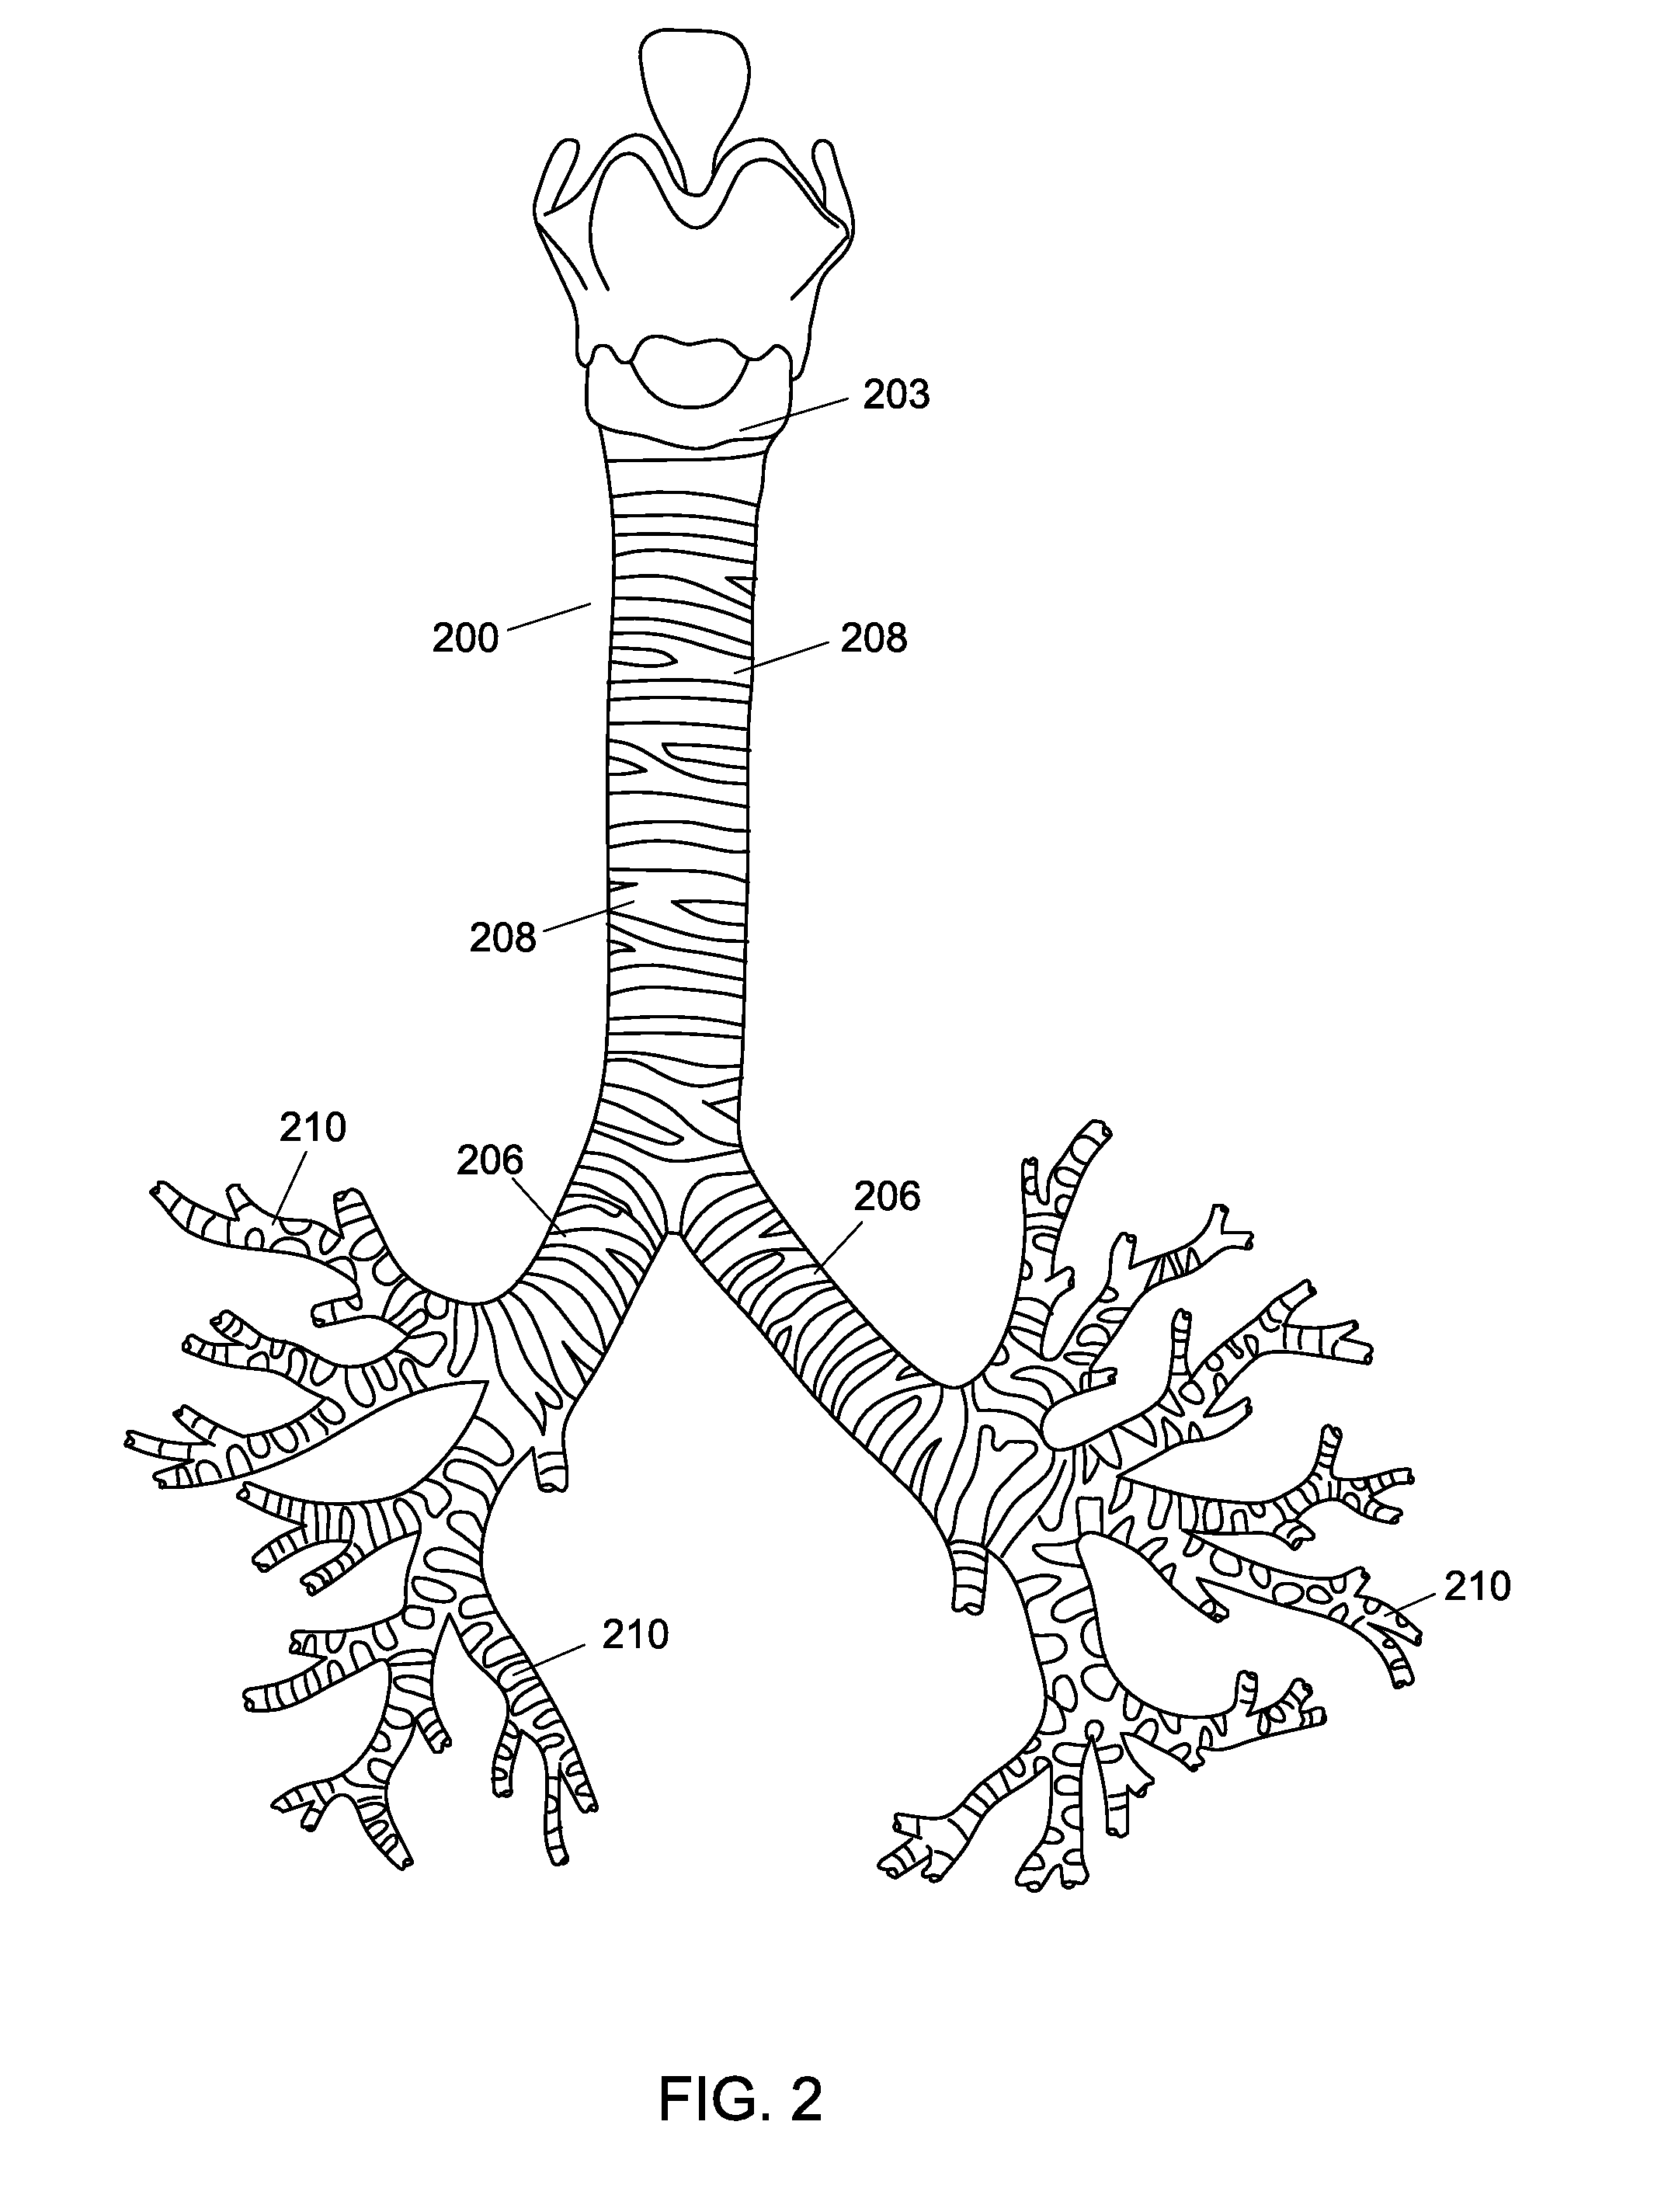 System and method for fabricating custom medical implant devices